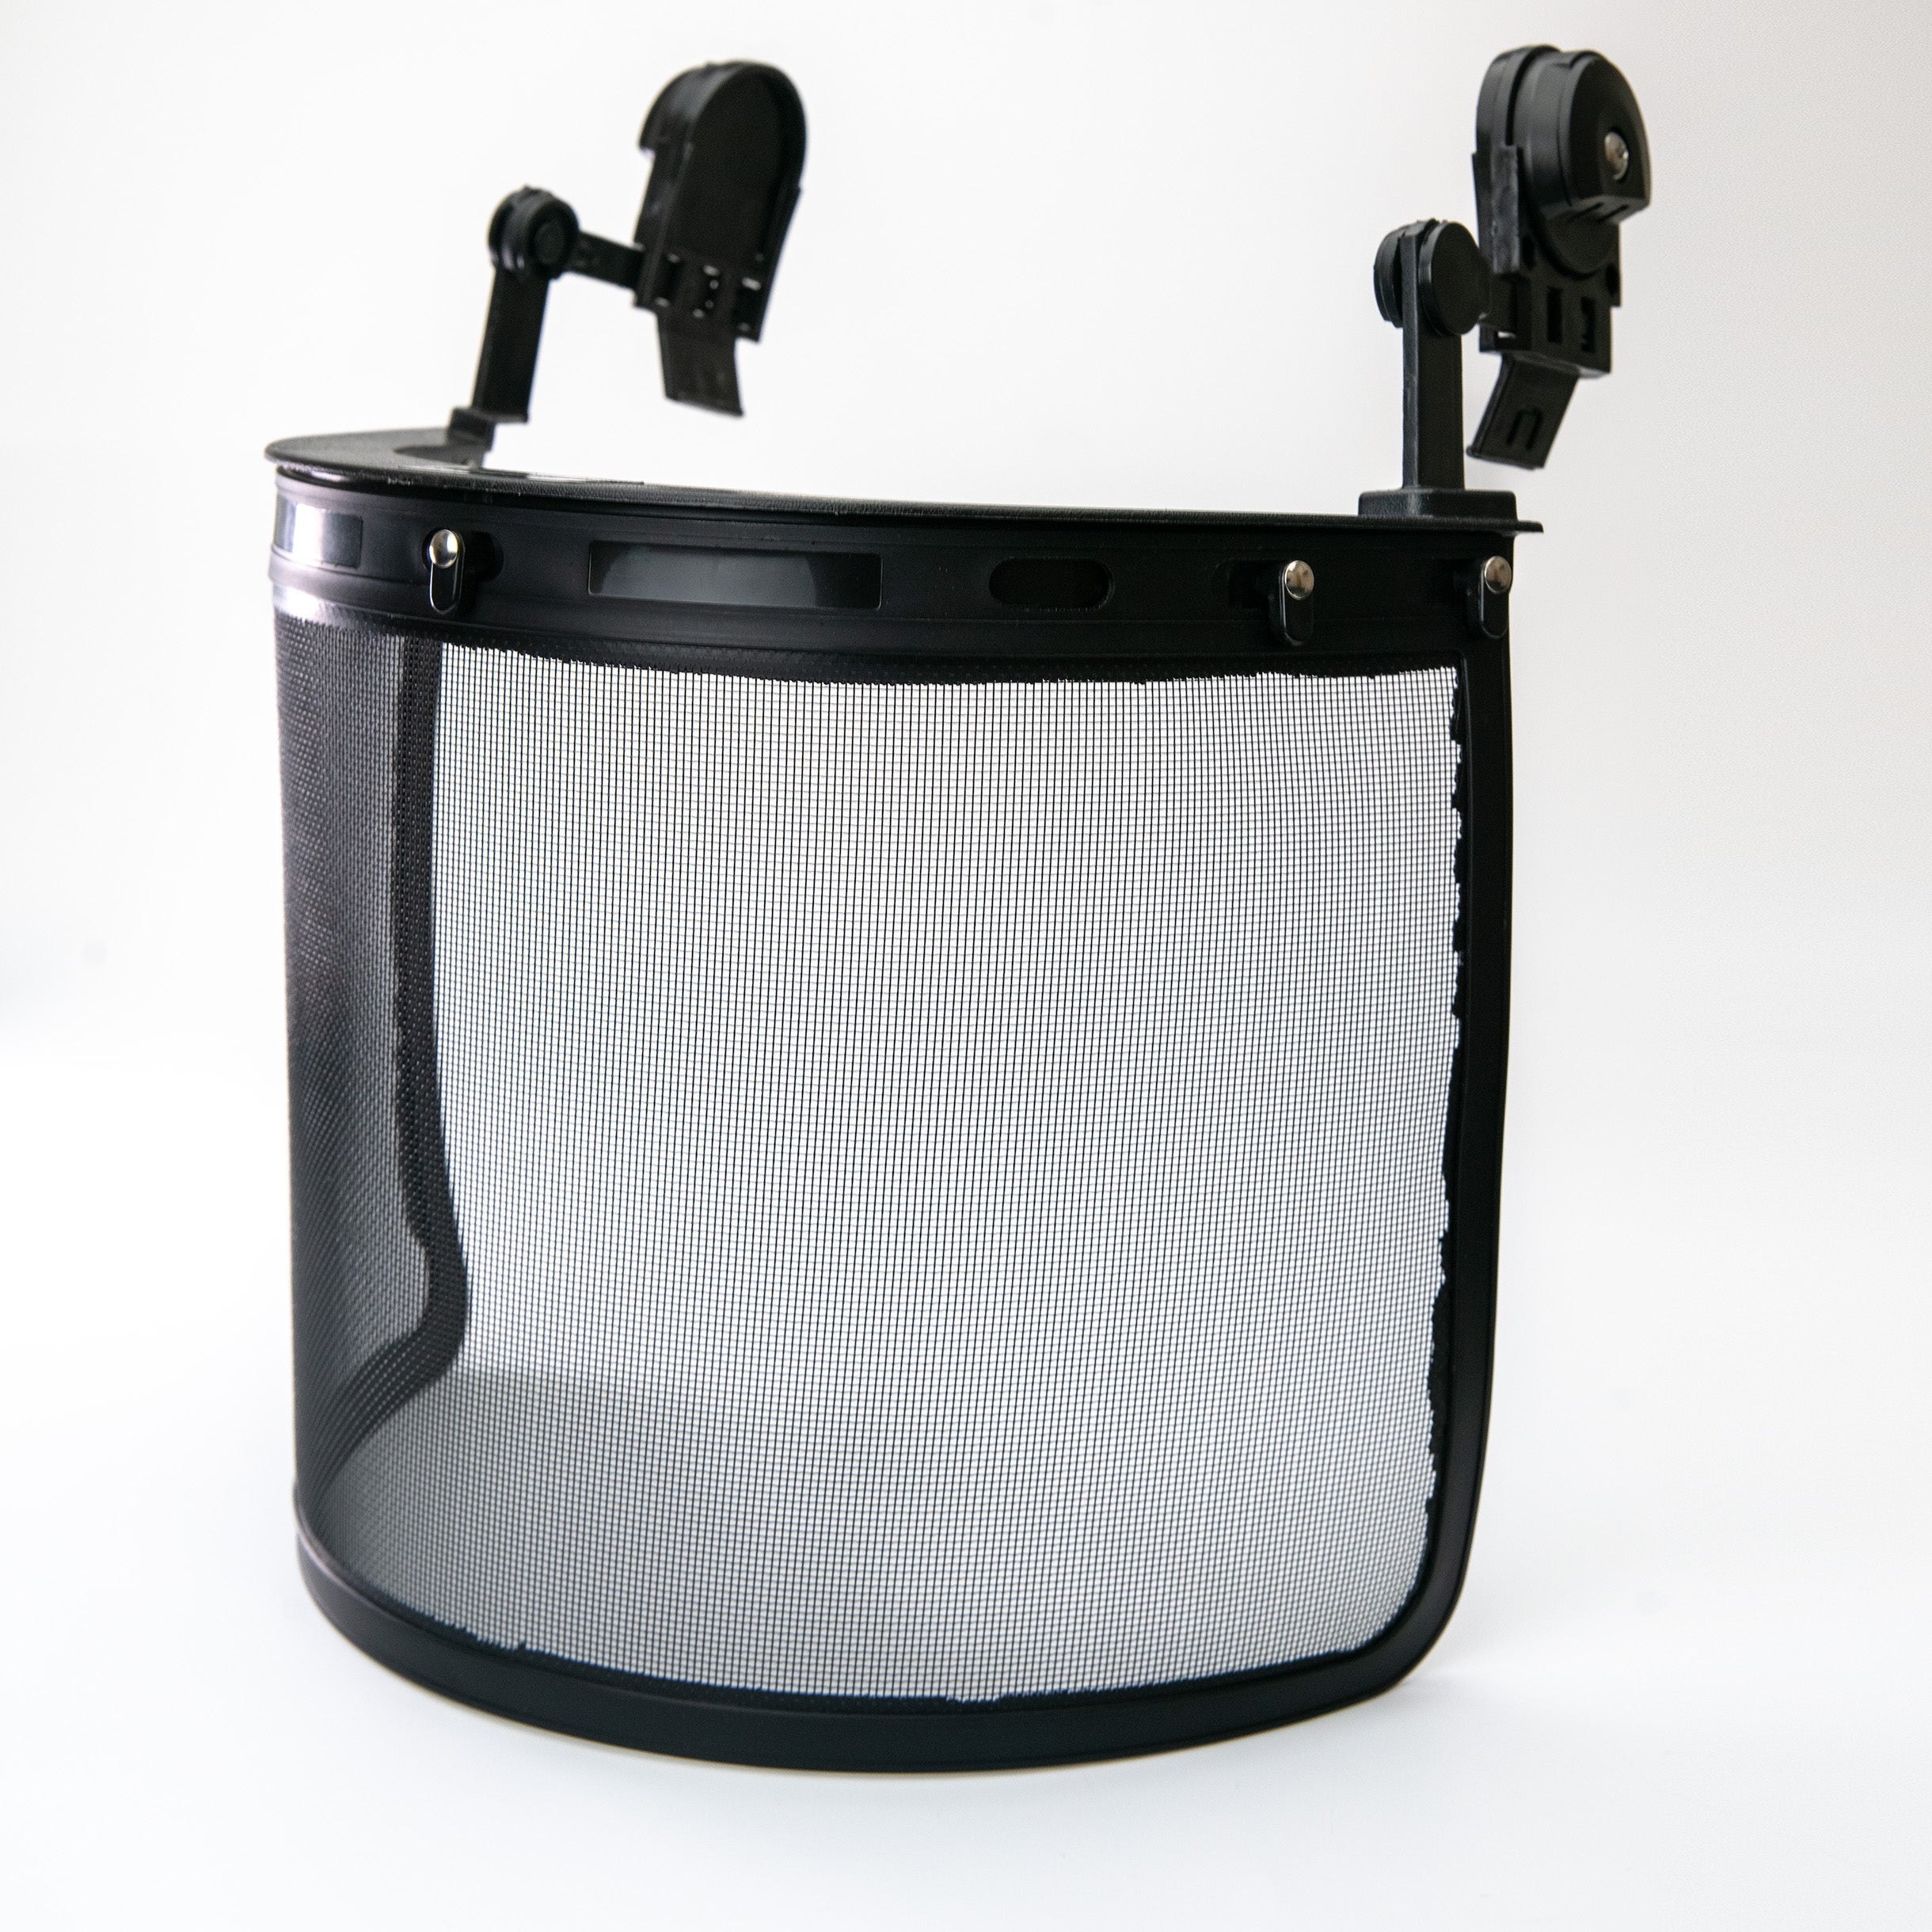 Replacement Mesh Shield + Helmet Bracket | Forestry Kit Accessory - Defender Safety